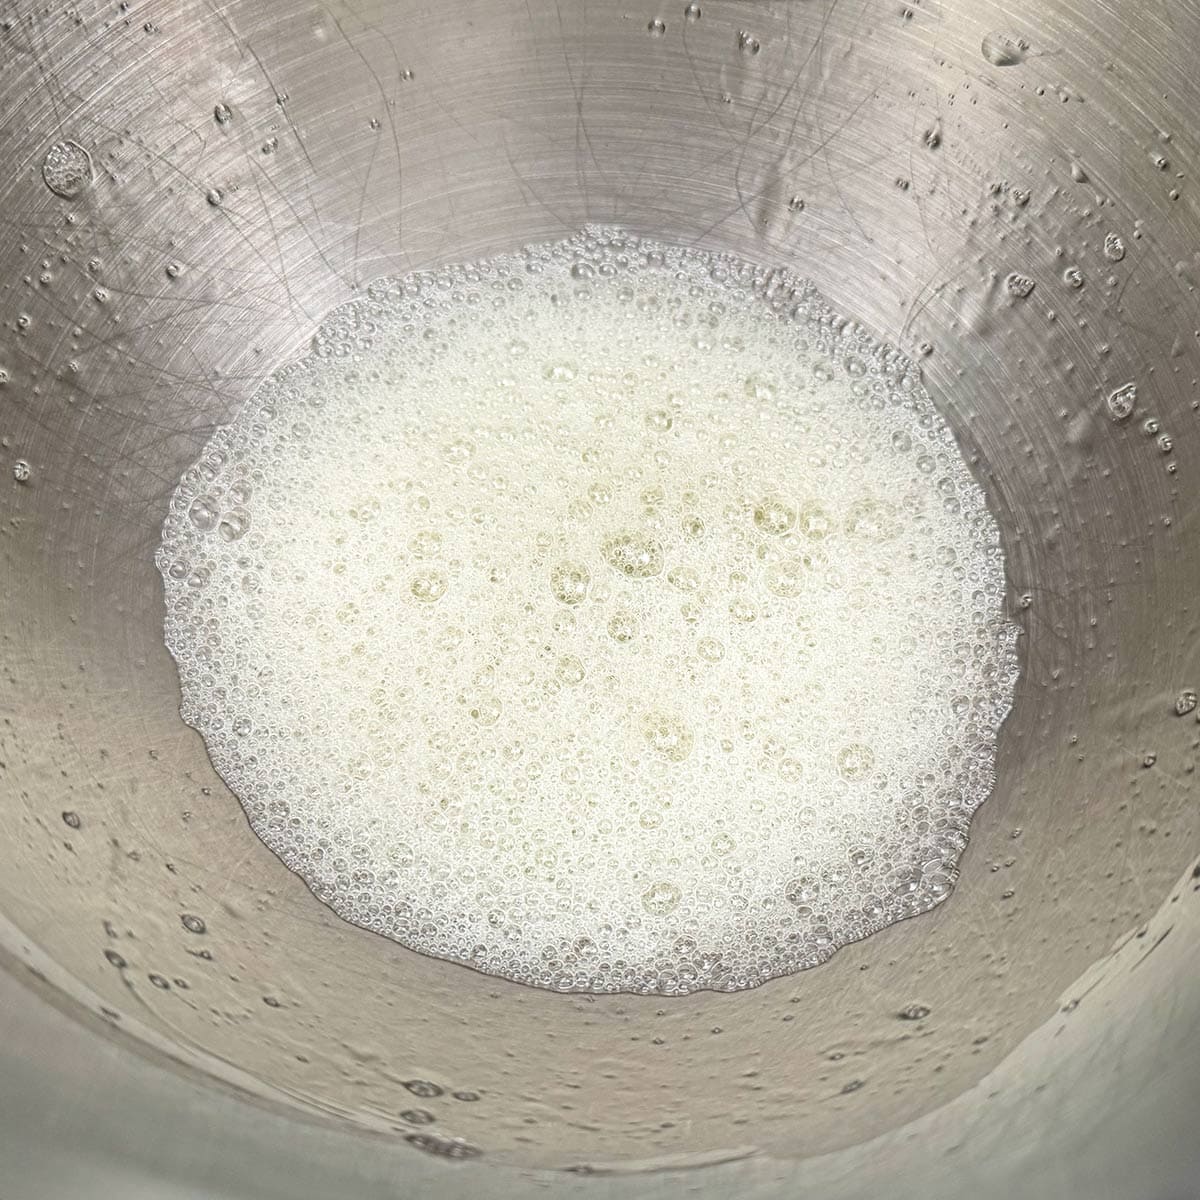 Frothy egg whites in a mixer bowl.